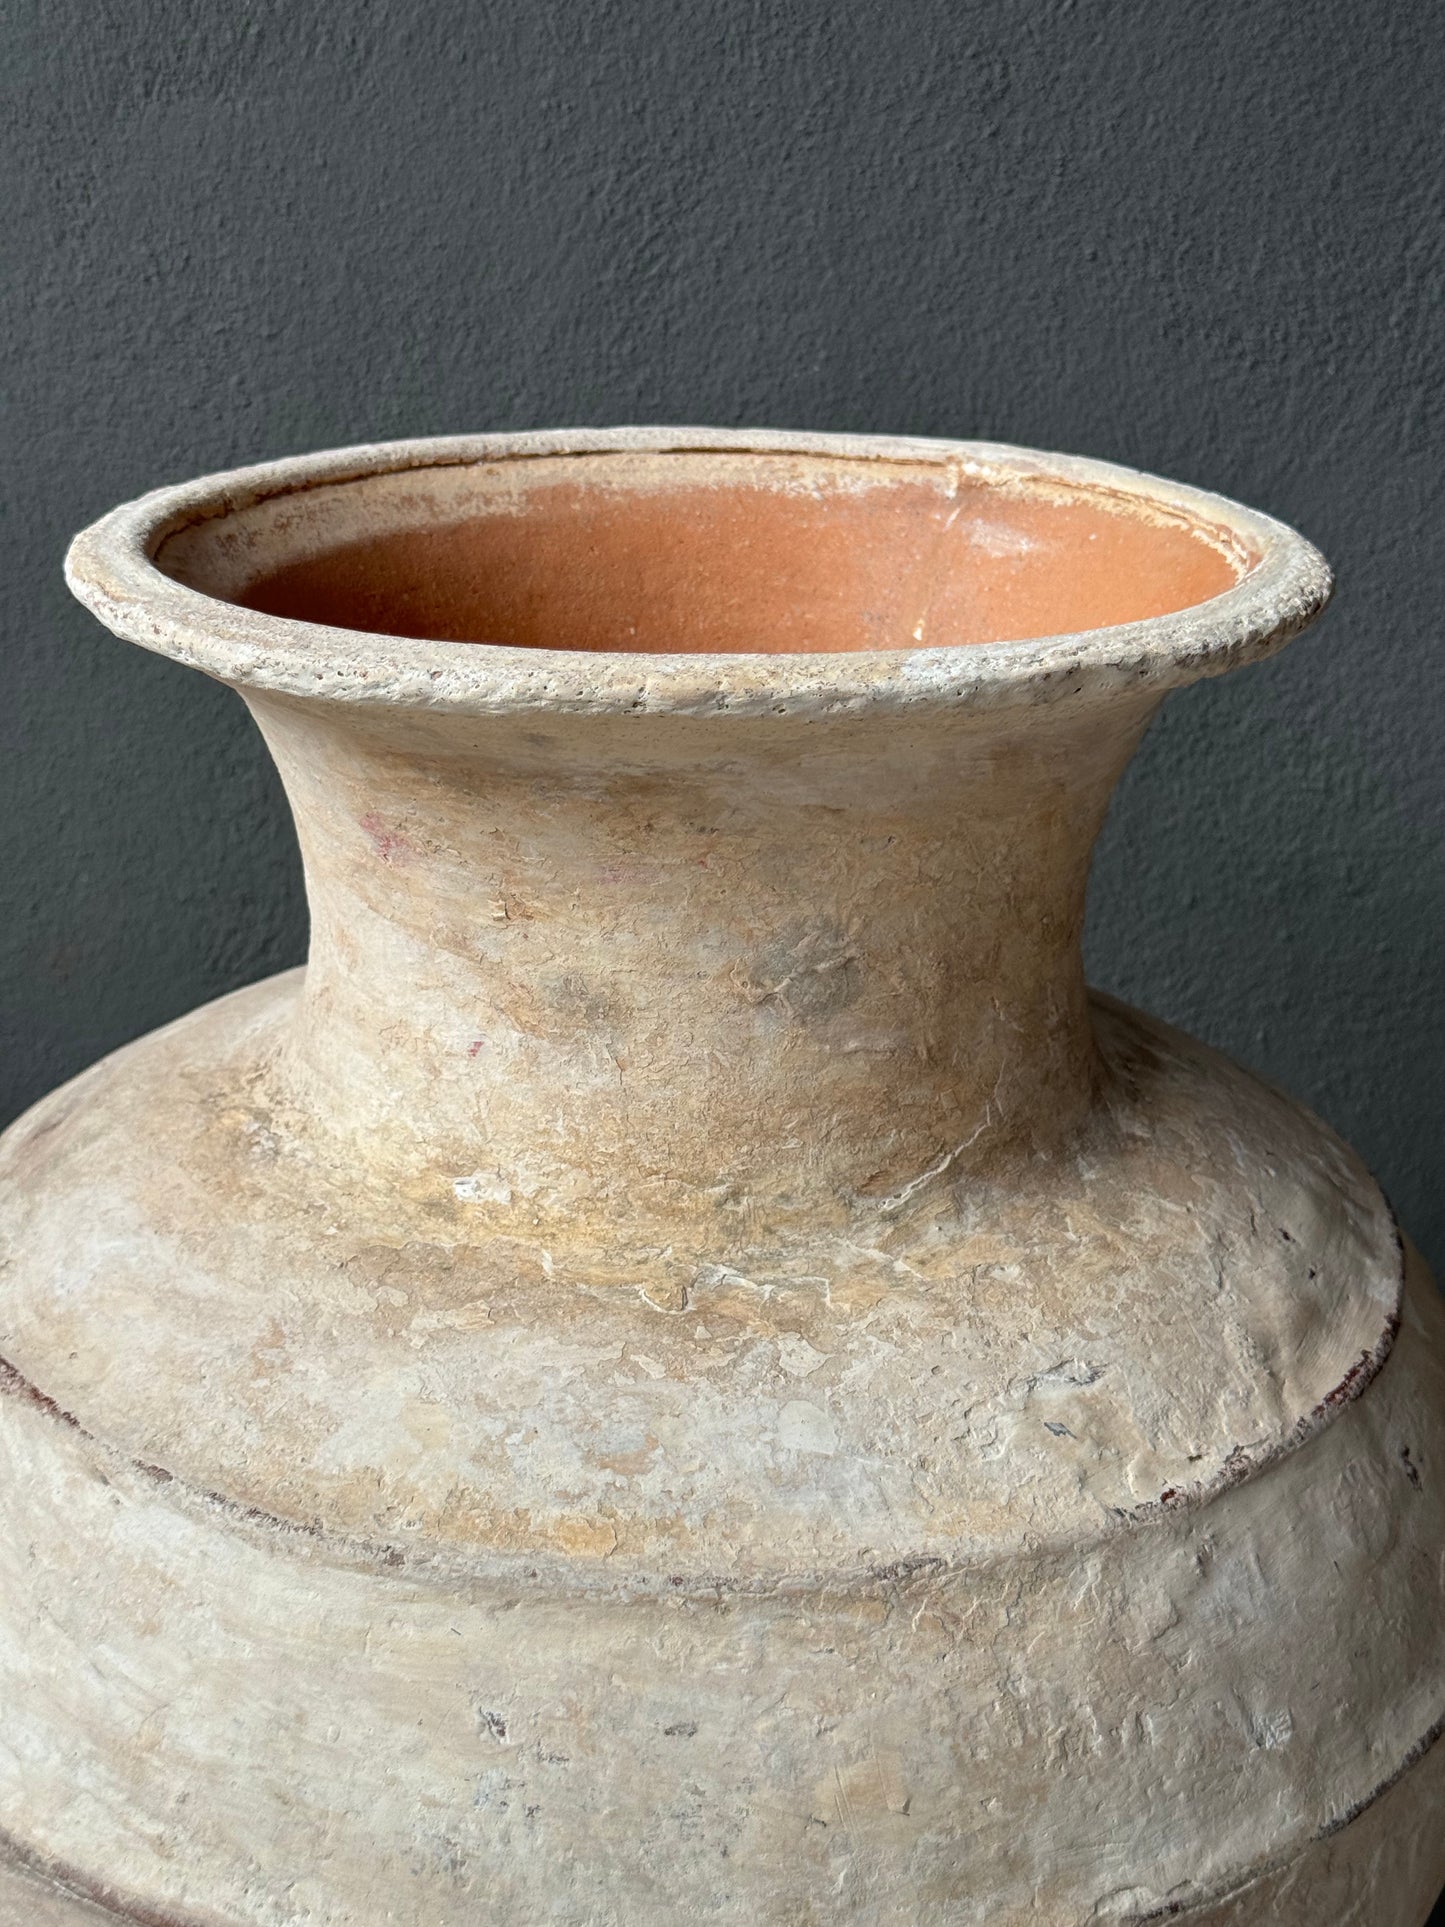 Ceramic Water Vessel From Yucatan, Early 1900’s